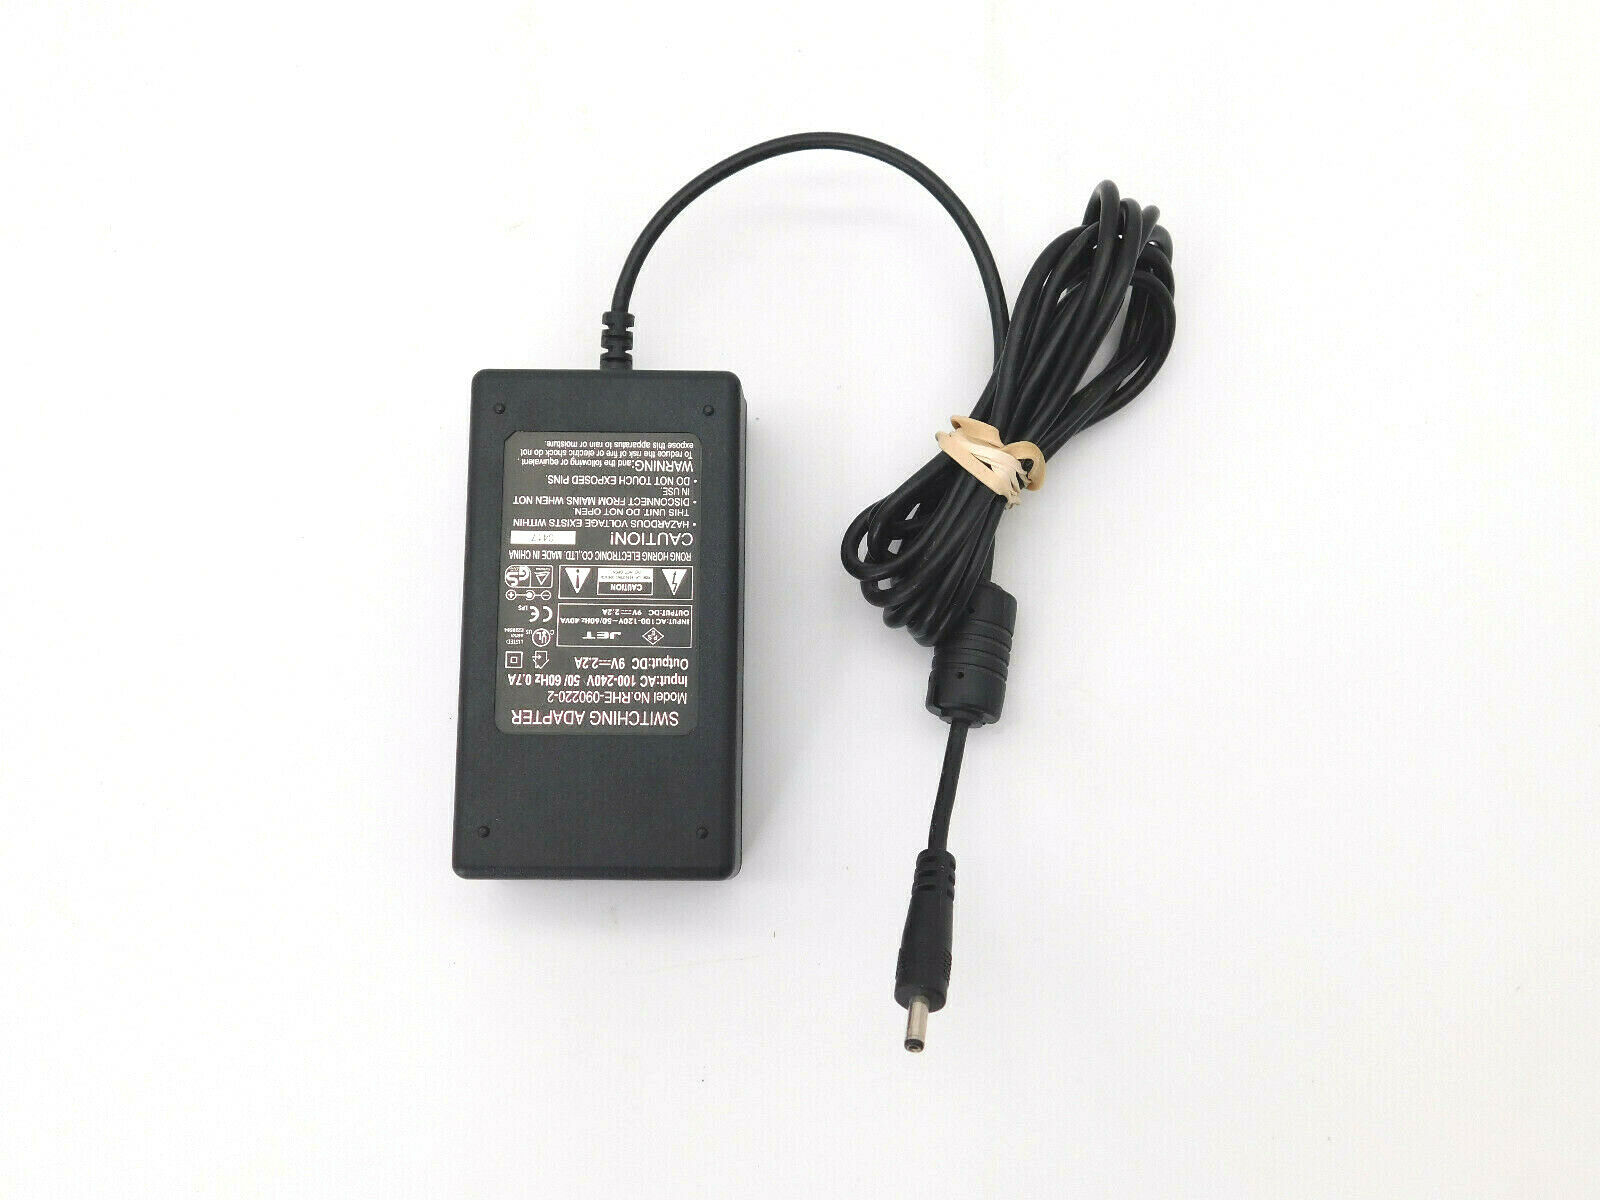 Genuine Jet RHE-090220-2 Switching Power Adapter 9V 2.2A Fast US Ship Genuine Jet RHE-090220-2 Switching Power Adapter